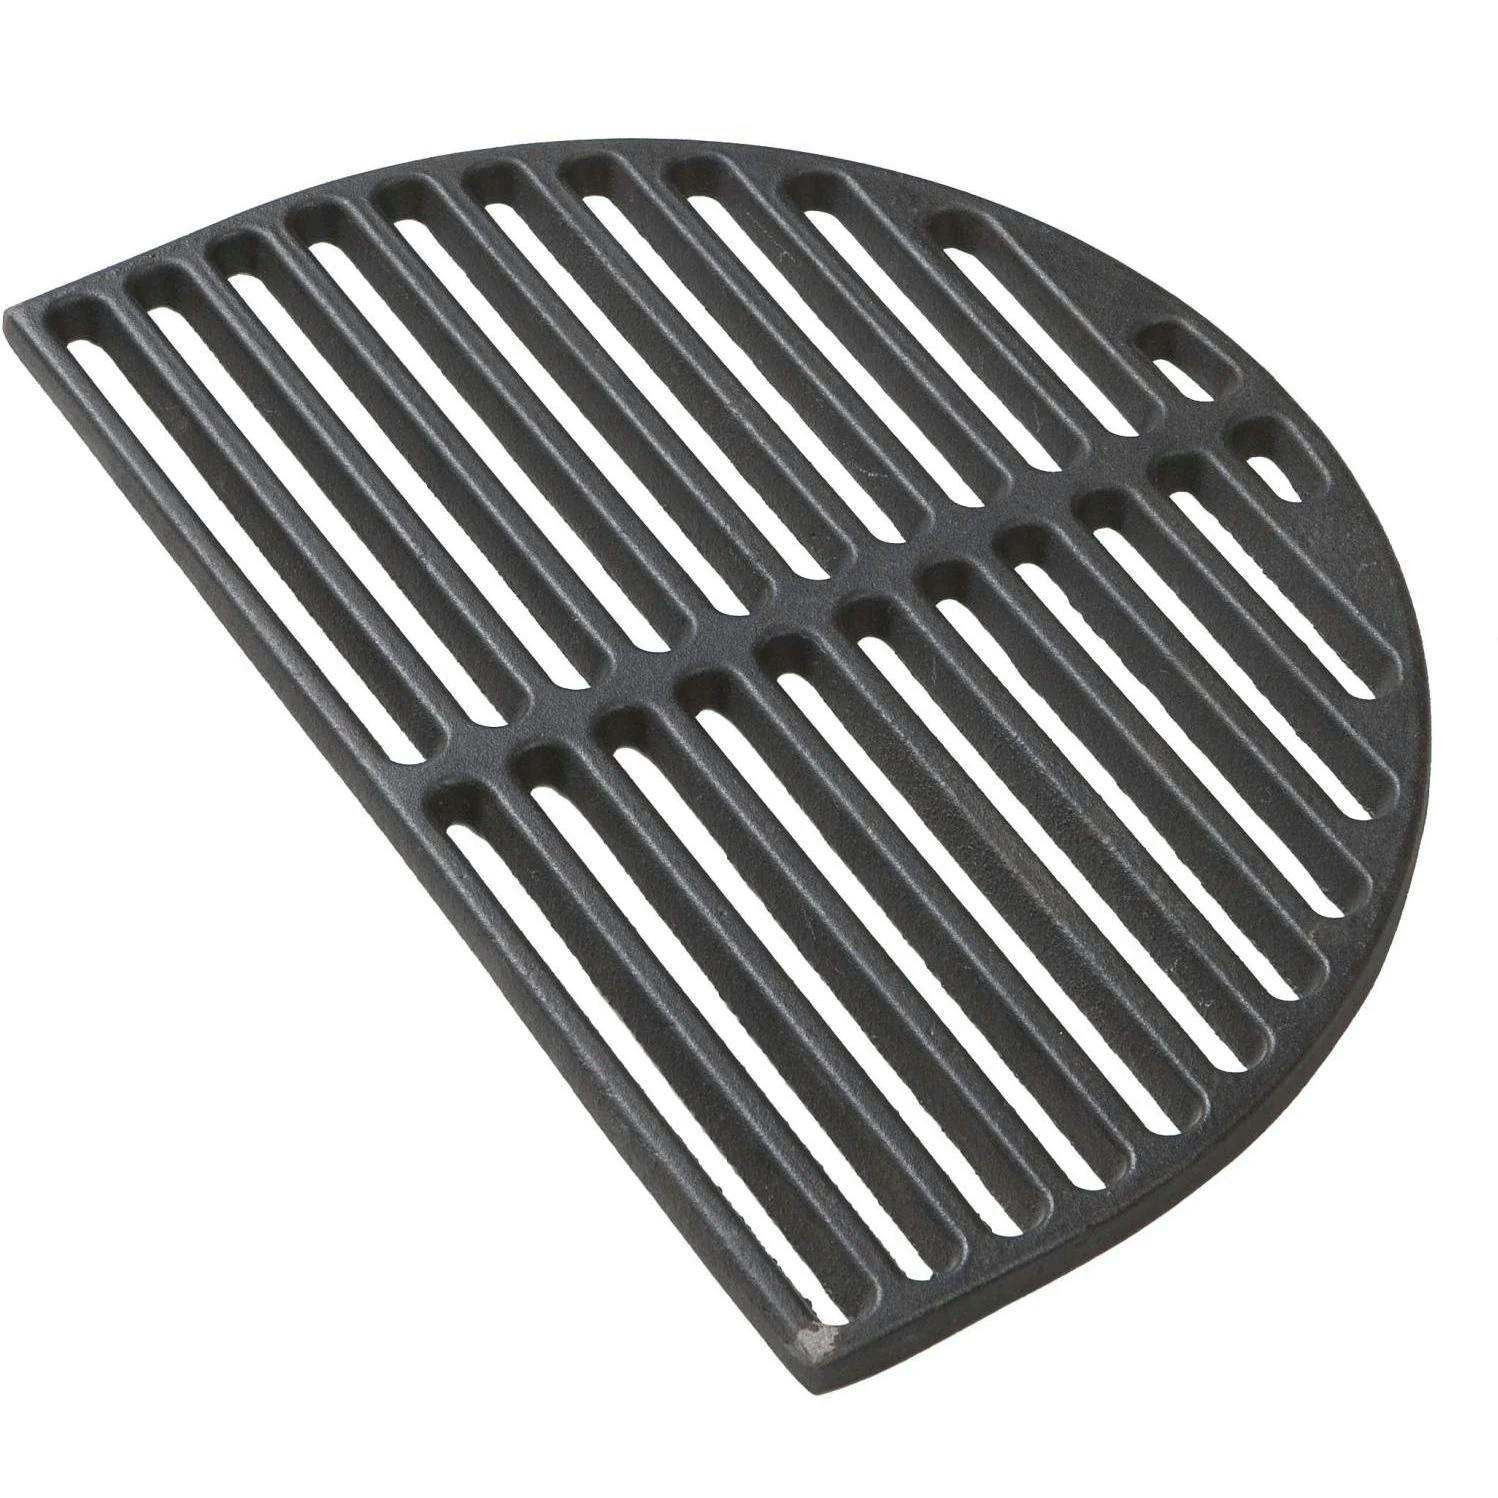 Primo Half Moon Cast Iron Searing Grate for Oval Large